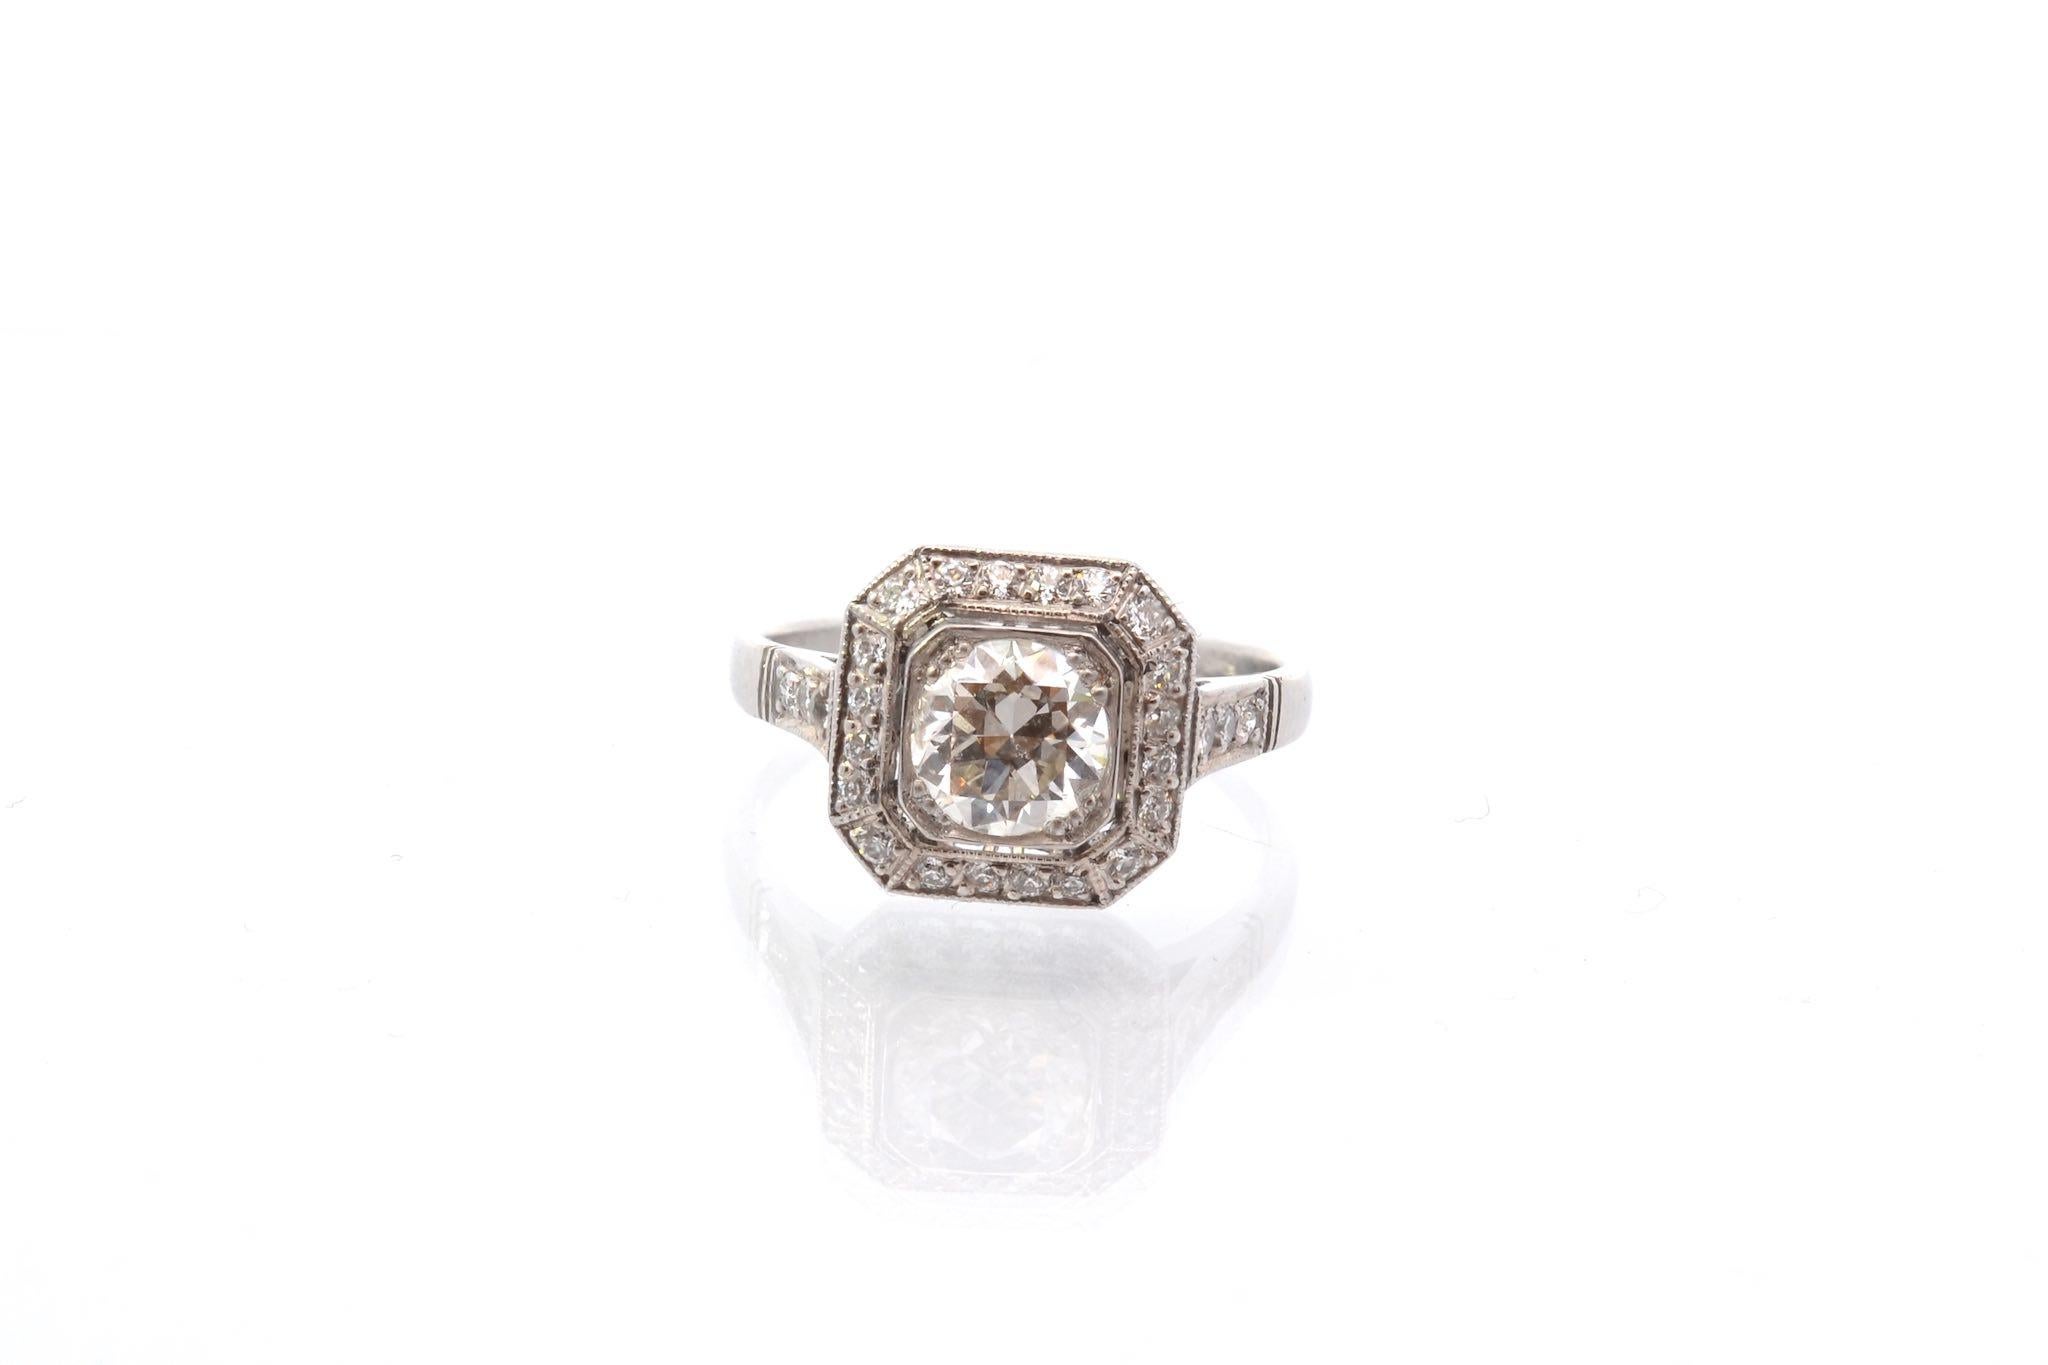 Stones: Old cut diamond of 1.02 cts SI2 / J and diamonds: 0.35 ct
Material: Platinum
Weight: 5.2g.
Period: Recent handmade art deco style
Size: 53 (free sizing)
Certificate
Ref. : 25193 - 25156